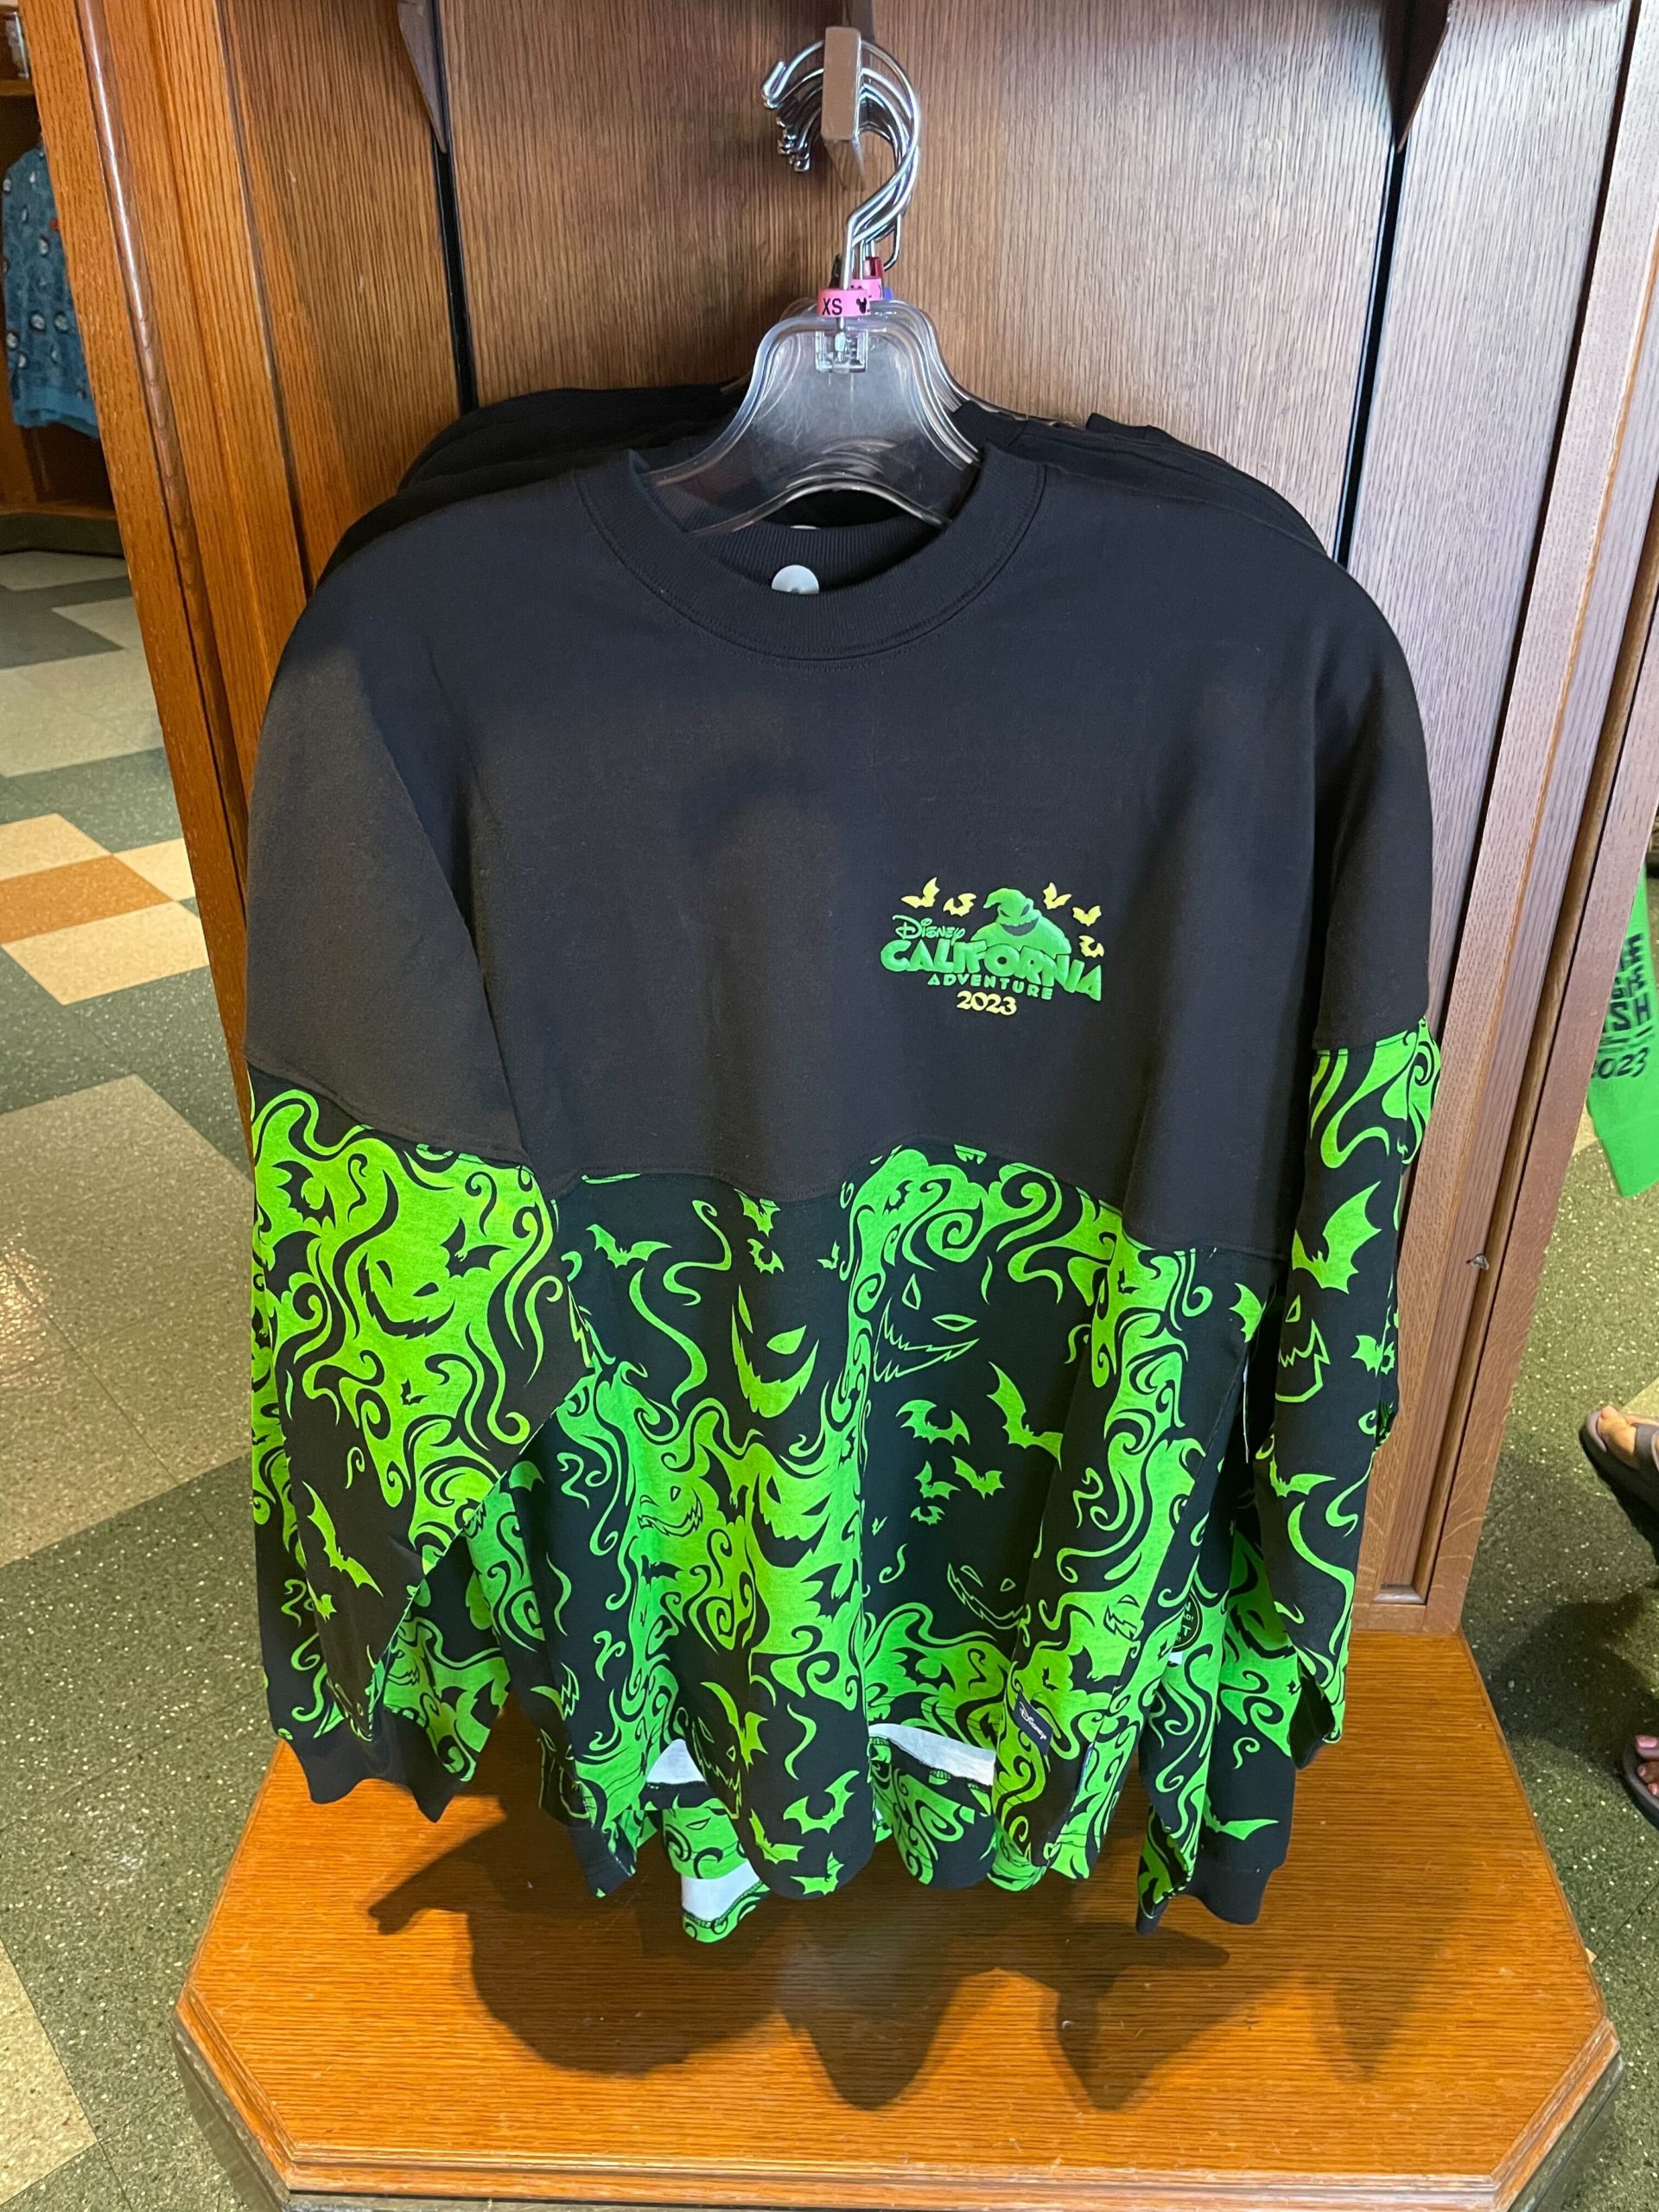 Amazing Oogie Boogie Bash Merchandise Drops Early at Disneyland